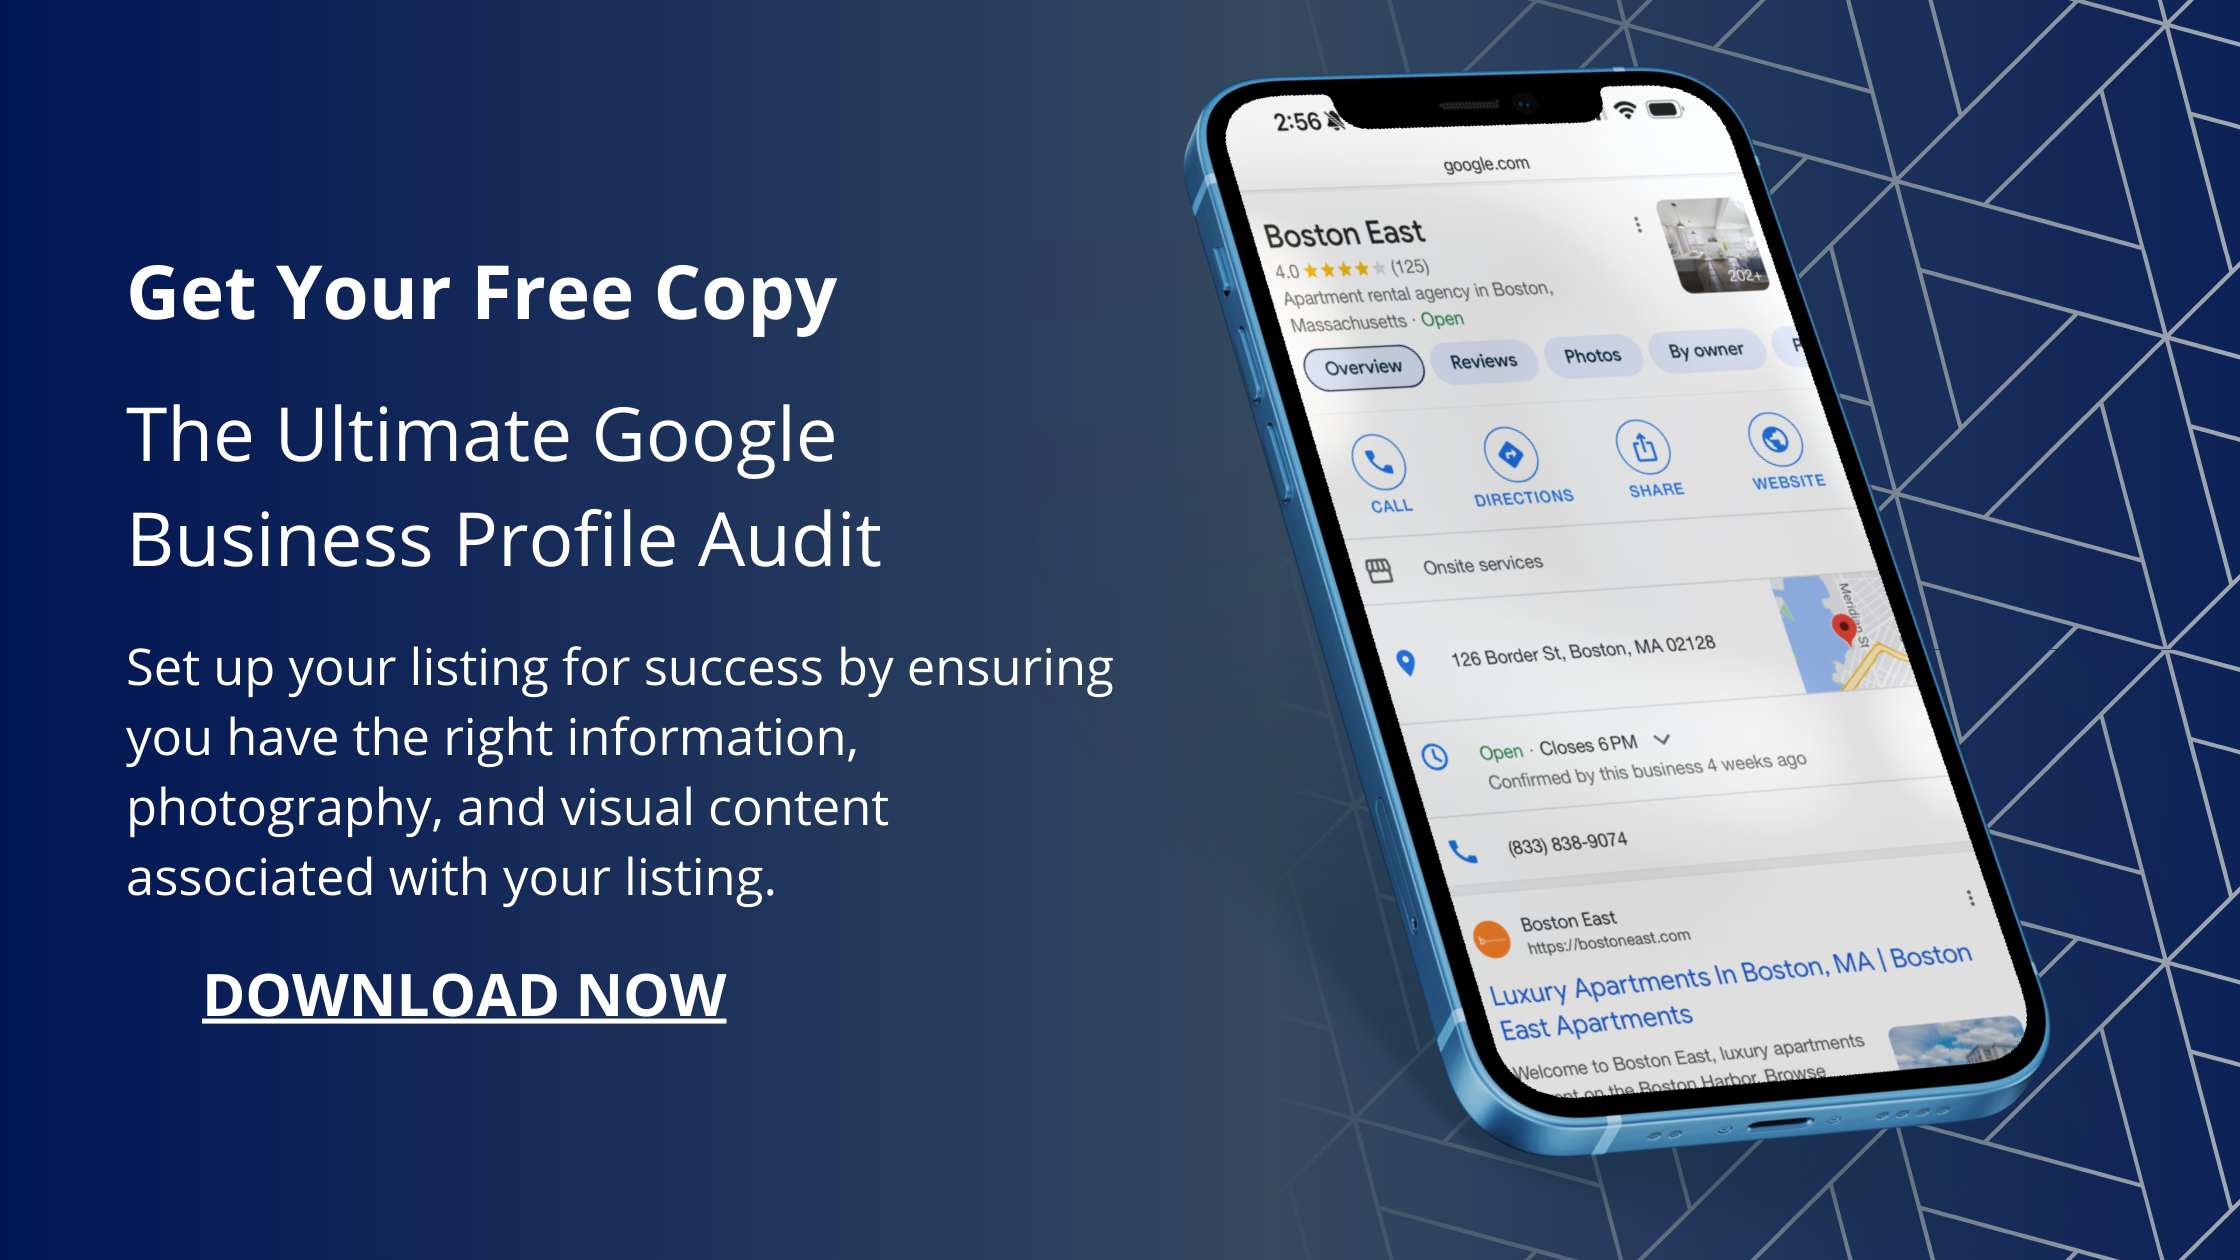 The Ultimate Google Business Profile Audit